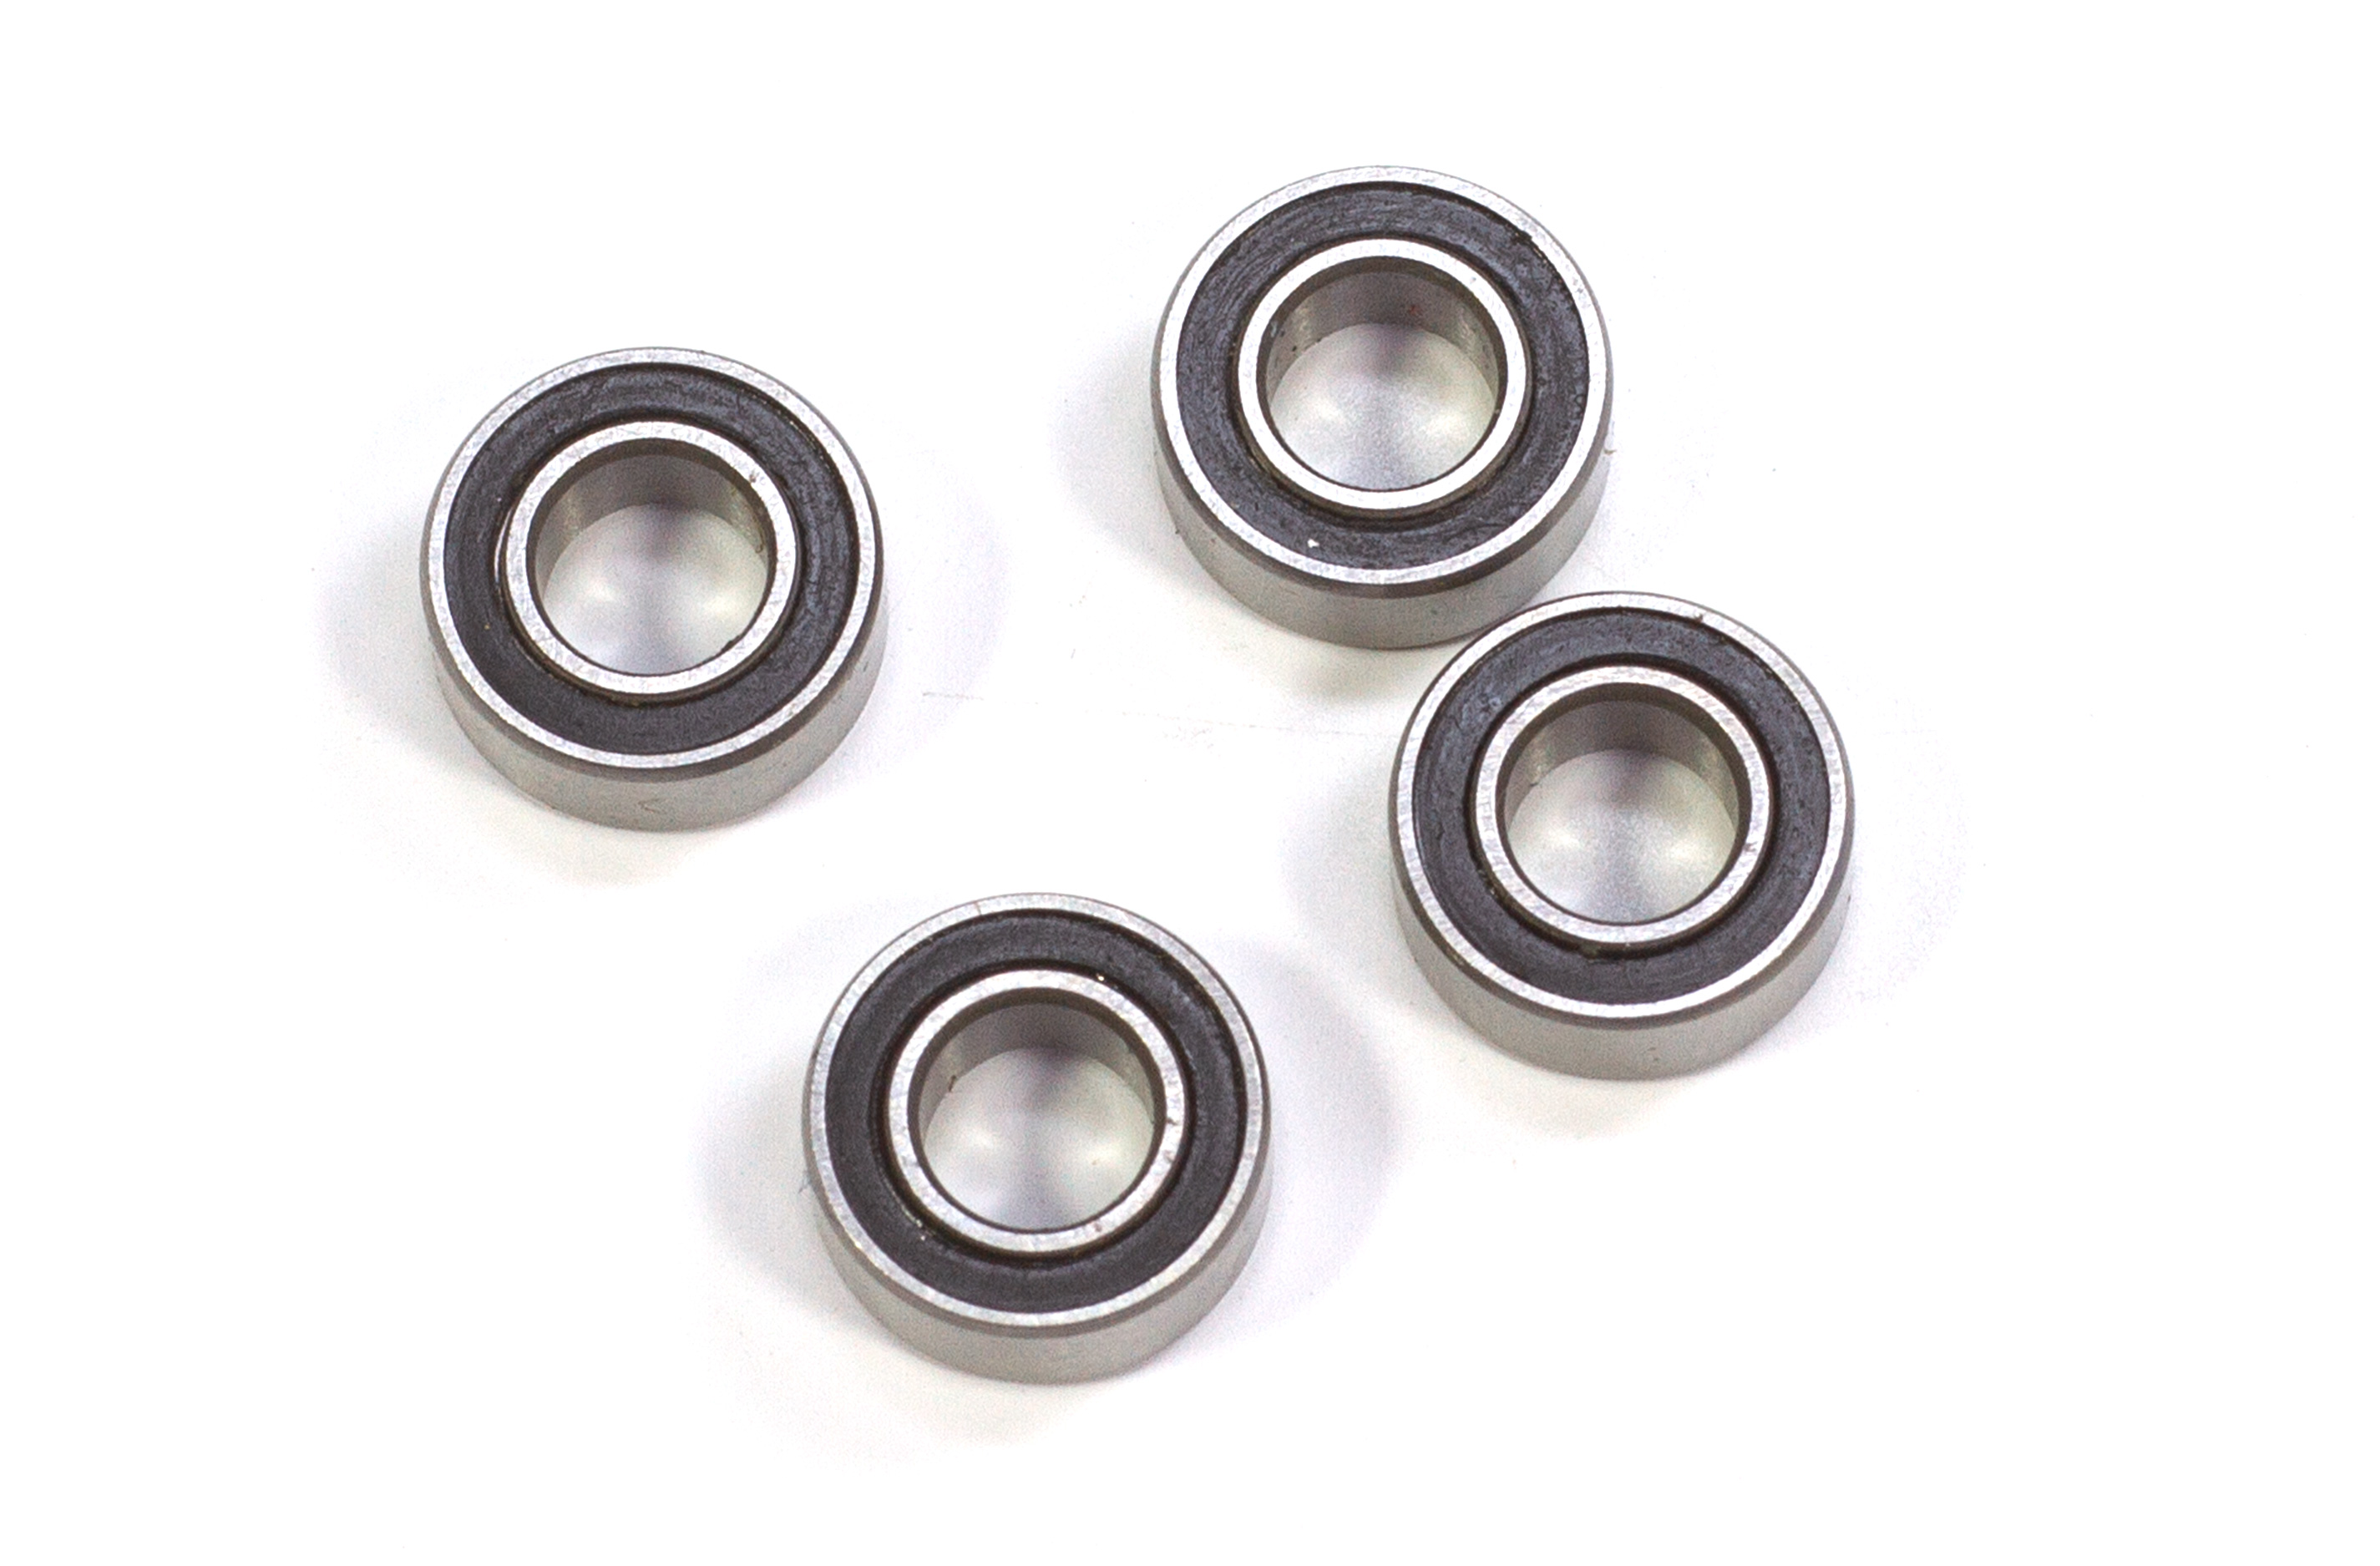 D01 Carson Ball bearing for Servo Saver 5x10x4 mm for Wild GP Attack